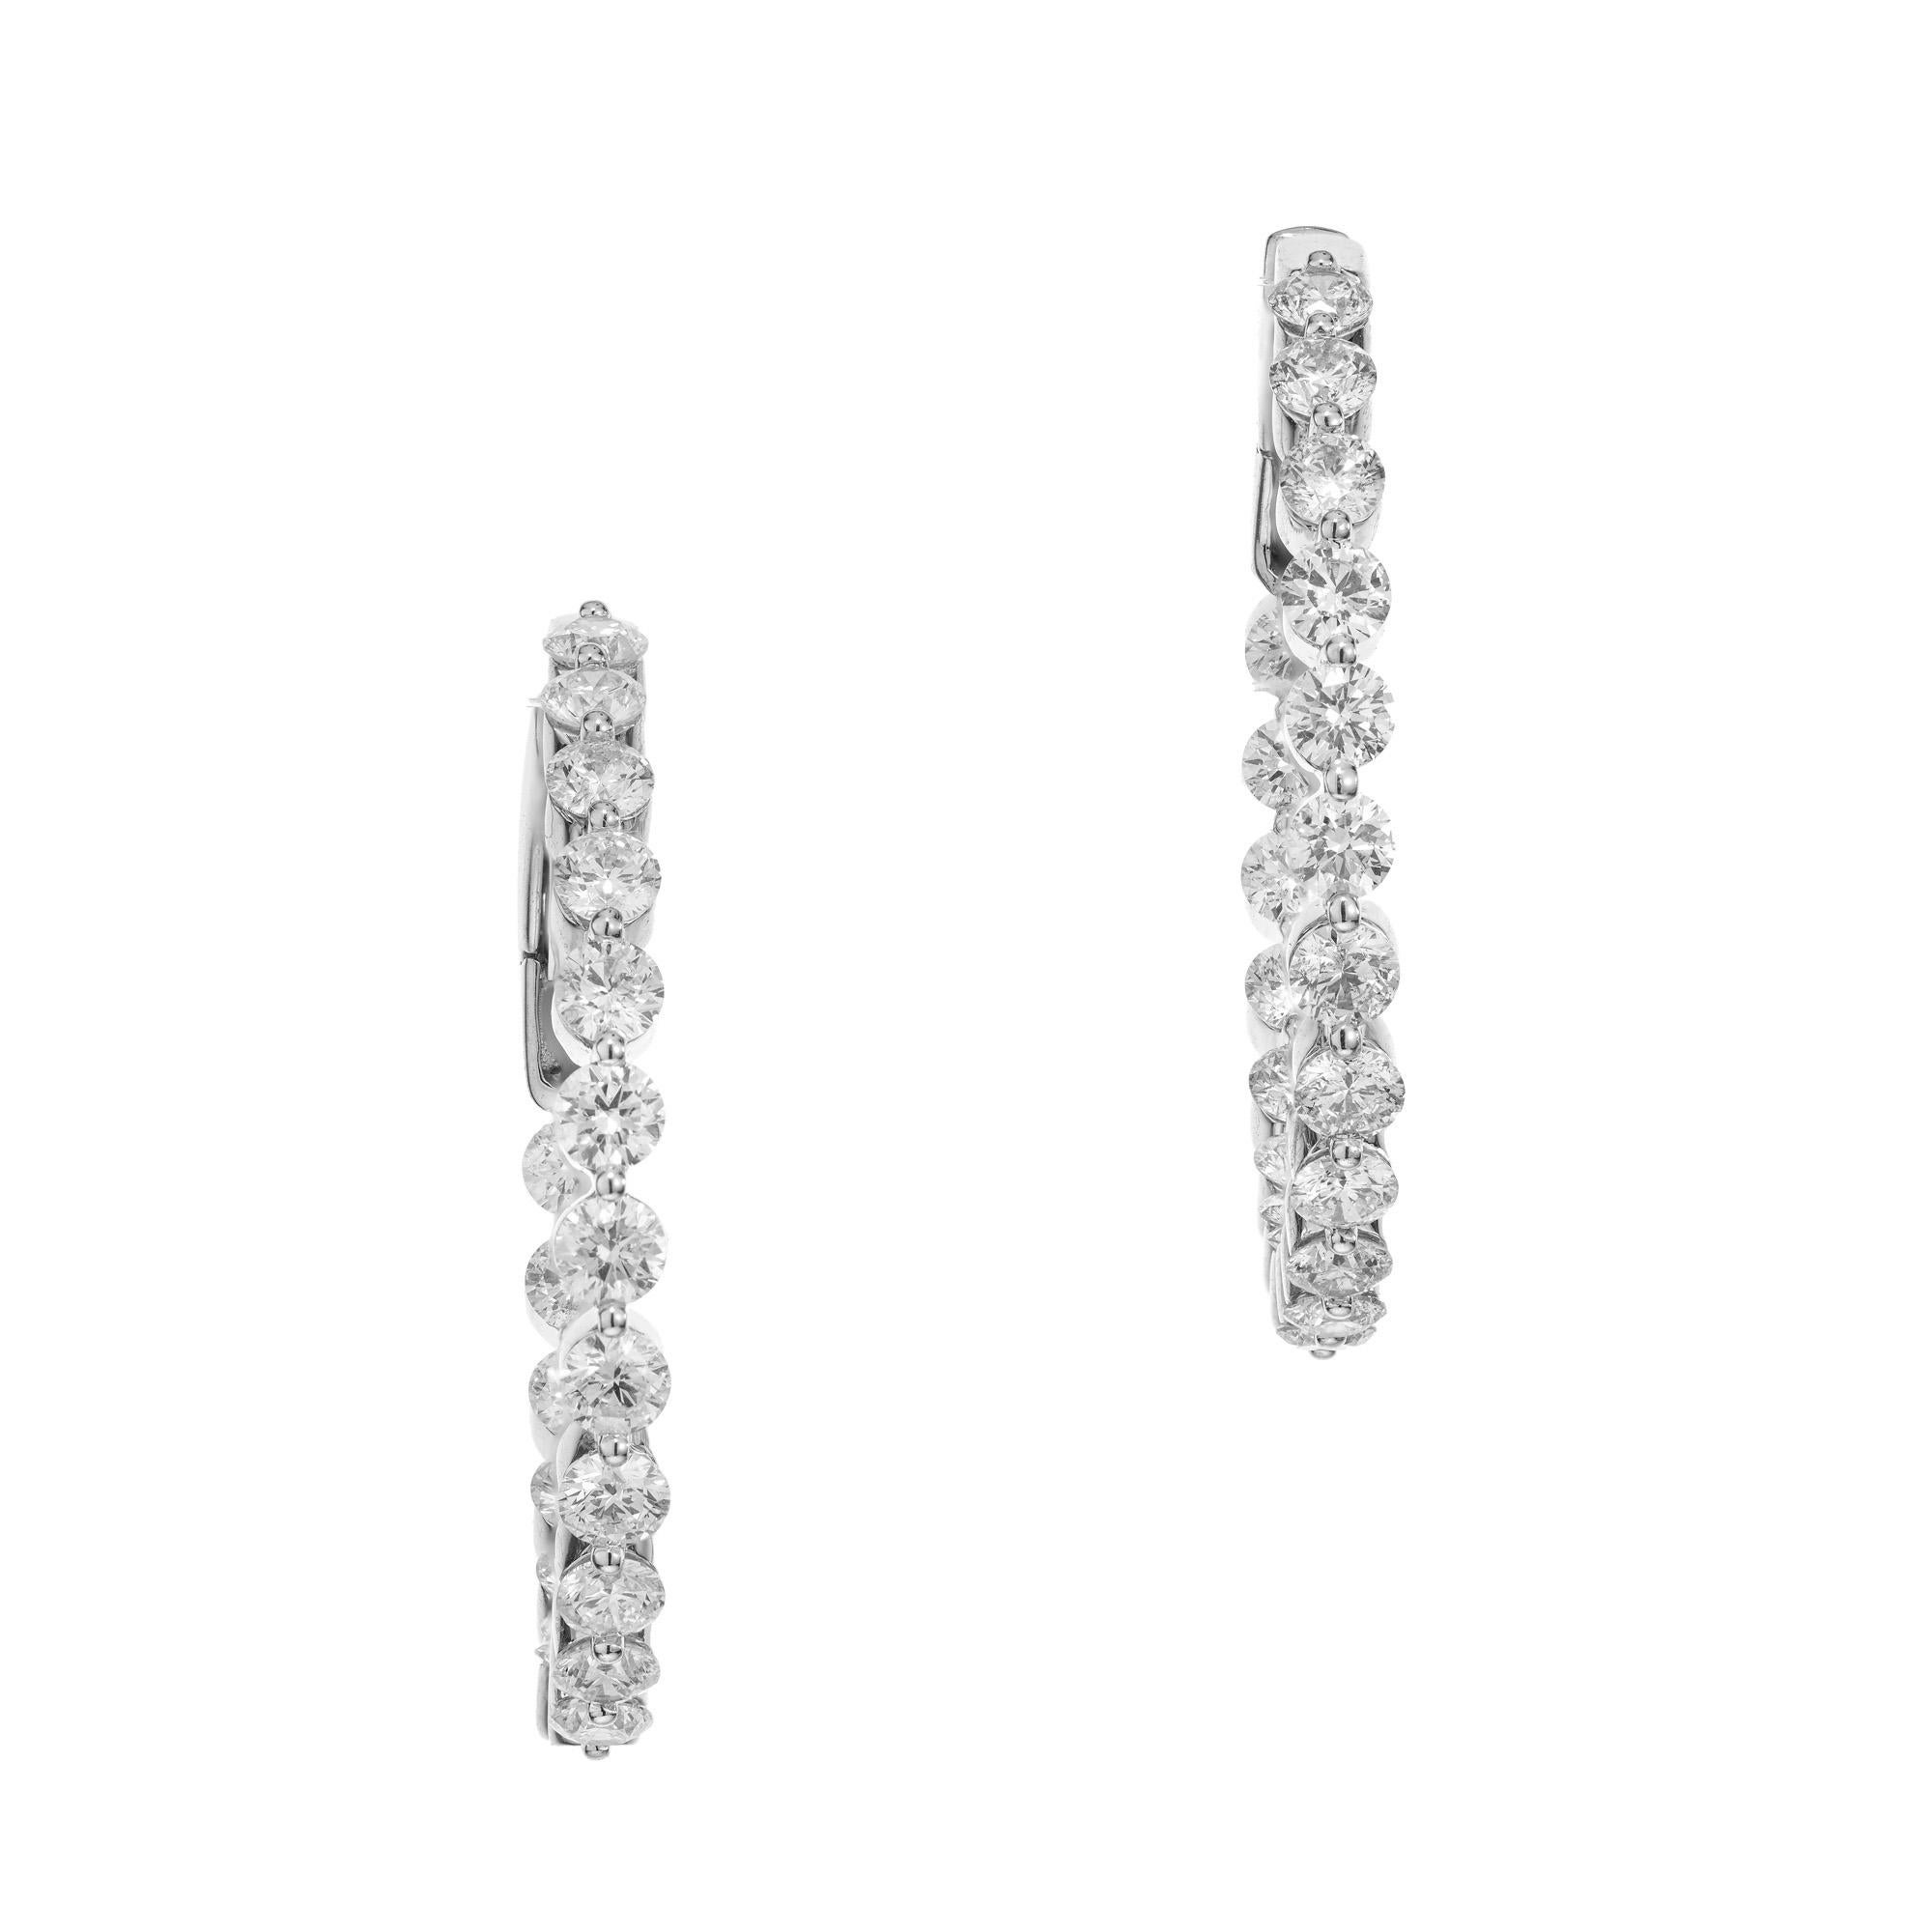 Beautiful Inside out diamond hoop earrings. These stunning 18k white gold hoops are set with 40 round brilliant cut diamonds, in side and out, with a total carat weight of 5.00.  1.5 Inch wide with extra safe and secure locking clip backs. Designed